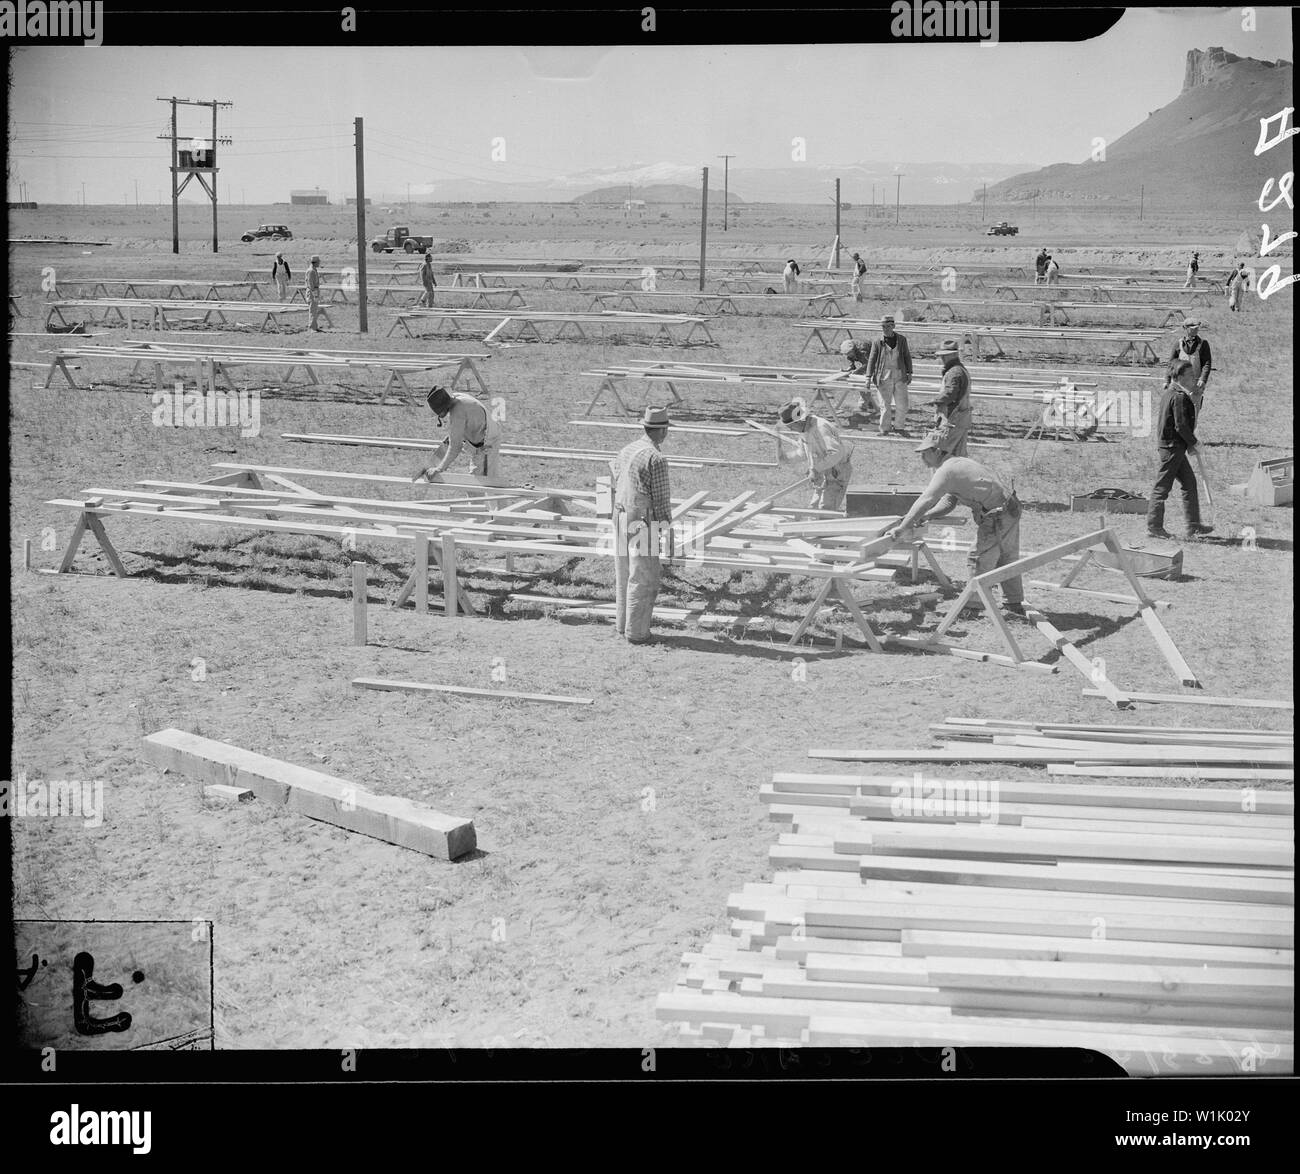 Tule Lake Relocation Center, Newell, California. Construction begins on War Relocation Authority ce . . .; Scope and content:  The full caption for this photograph reads: Tule Lake Relocation Center, Newell, California. Construction begins on War Relocation Authority center for evacuees of Japanese ancestry near Tule Lake in Modoc County, California, south of the Oregon border. Stock Photo